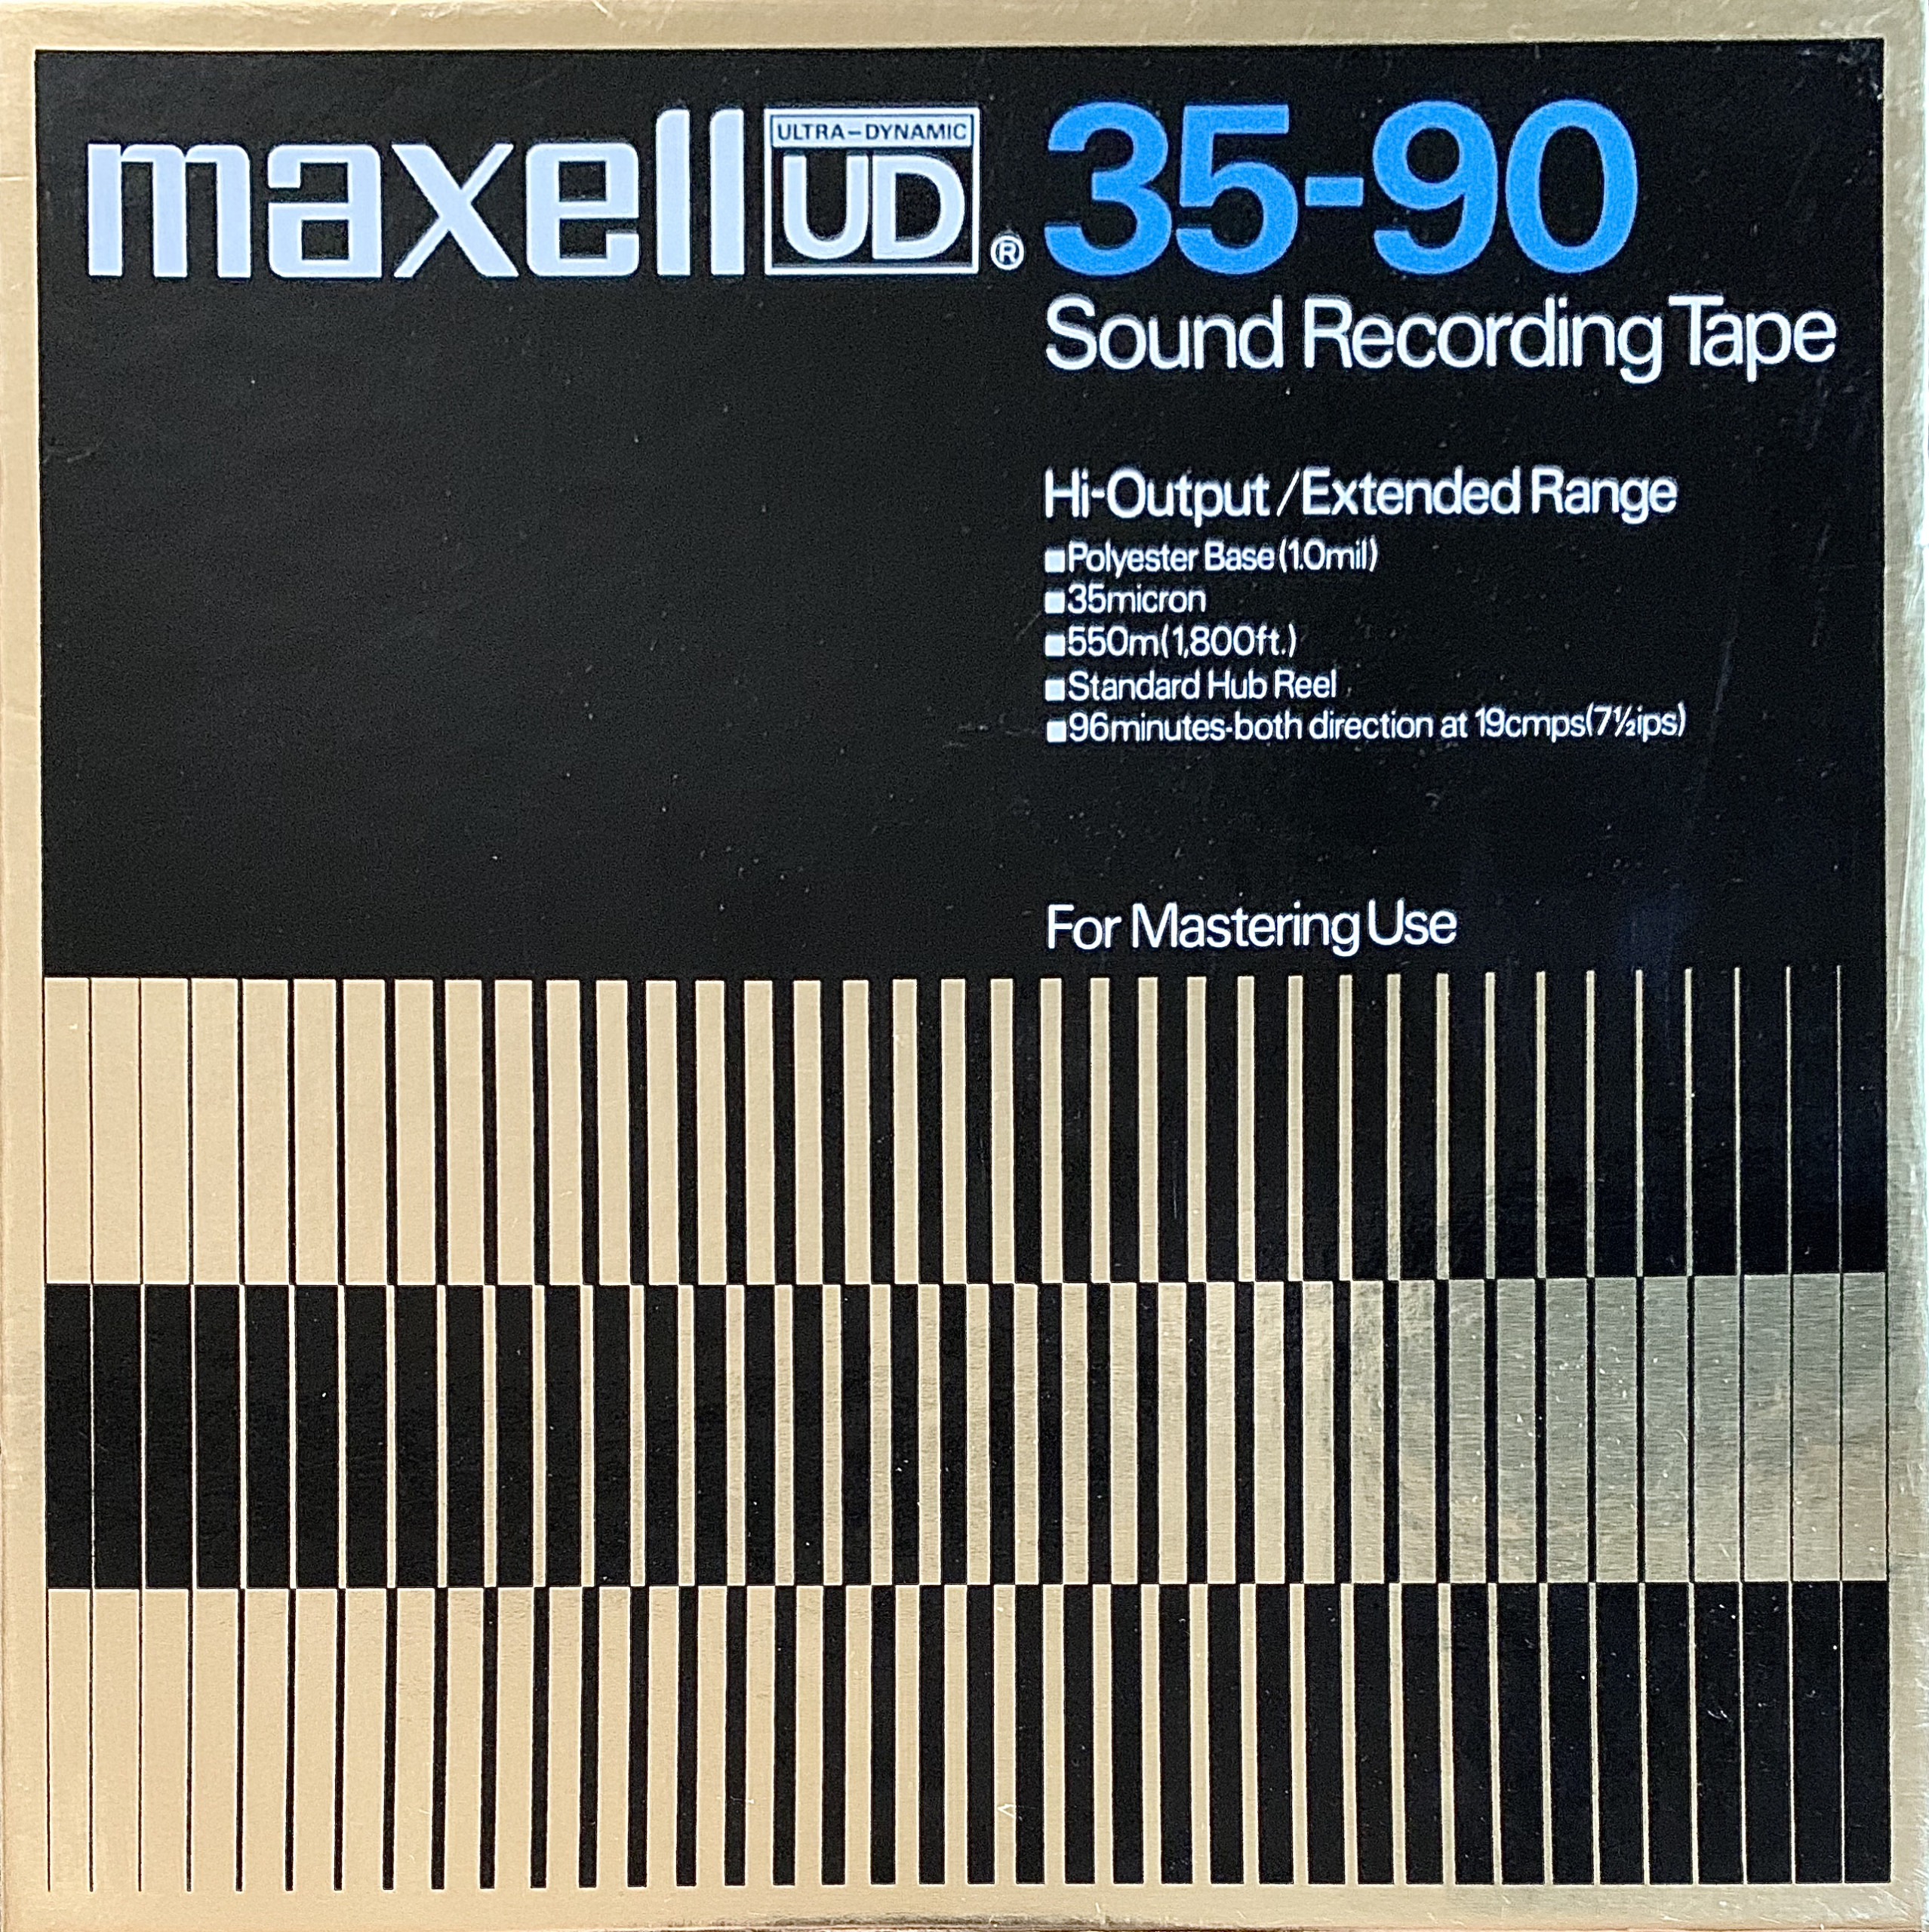 Maxell UD 35-90B XL1 7 35-90B Reel To Reel Tape Used 7 ** 2